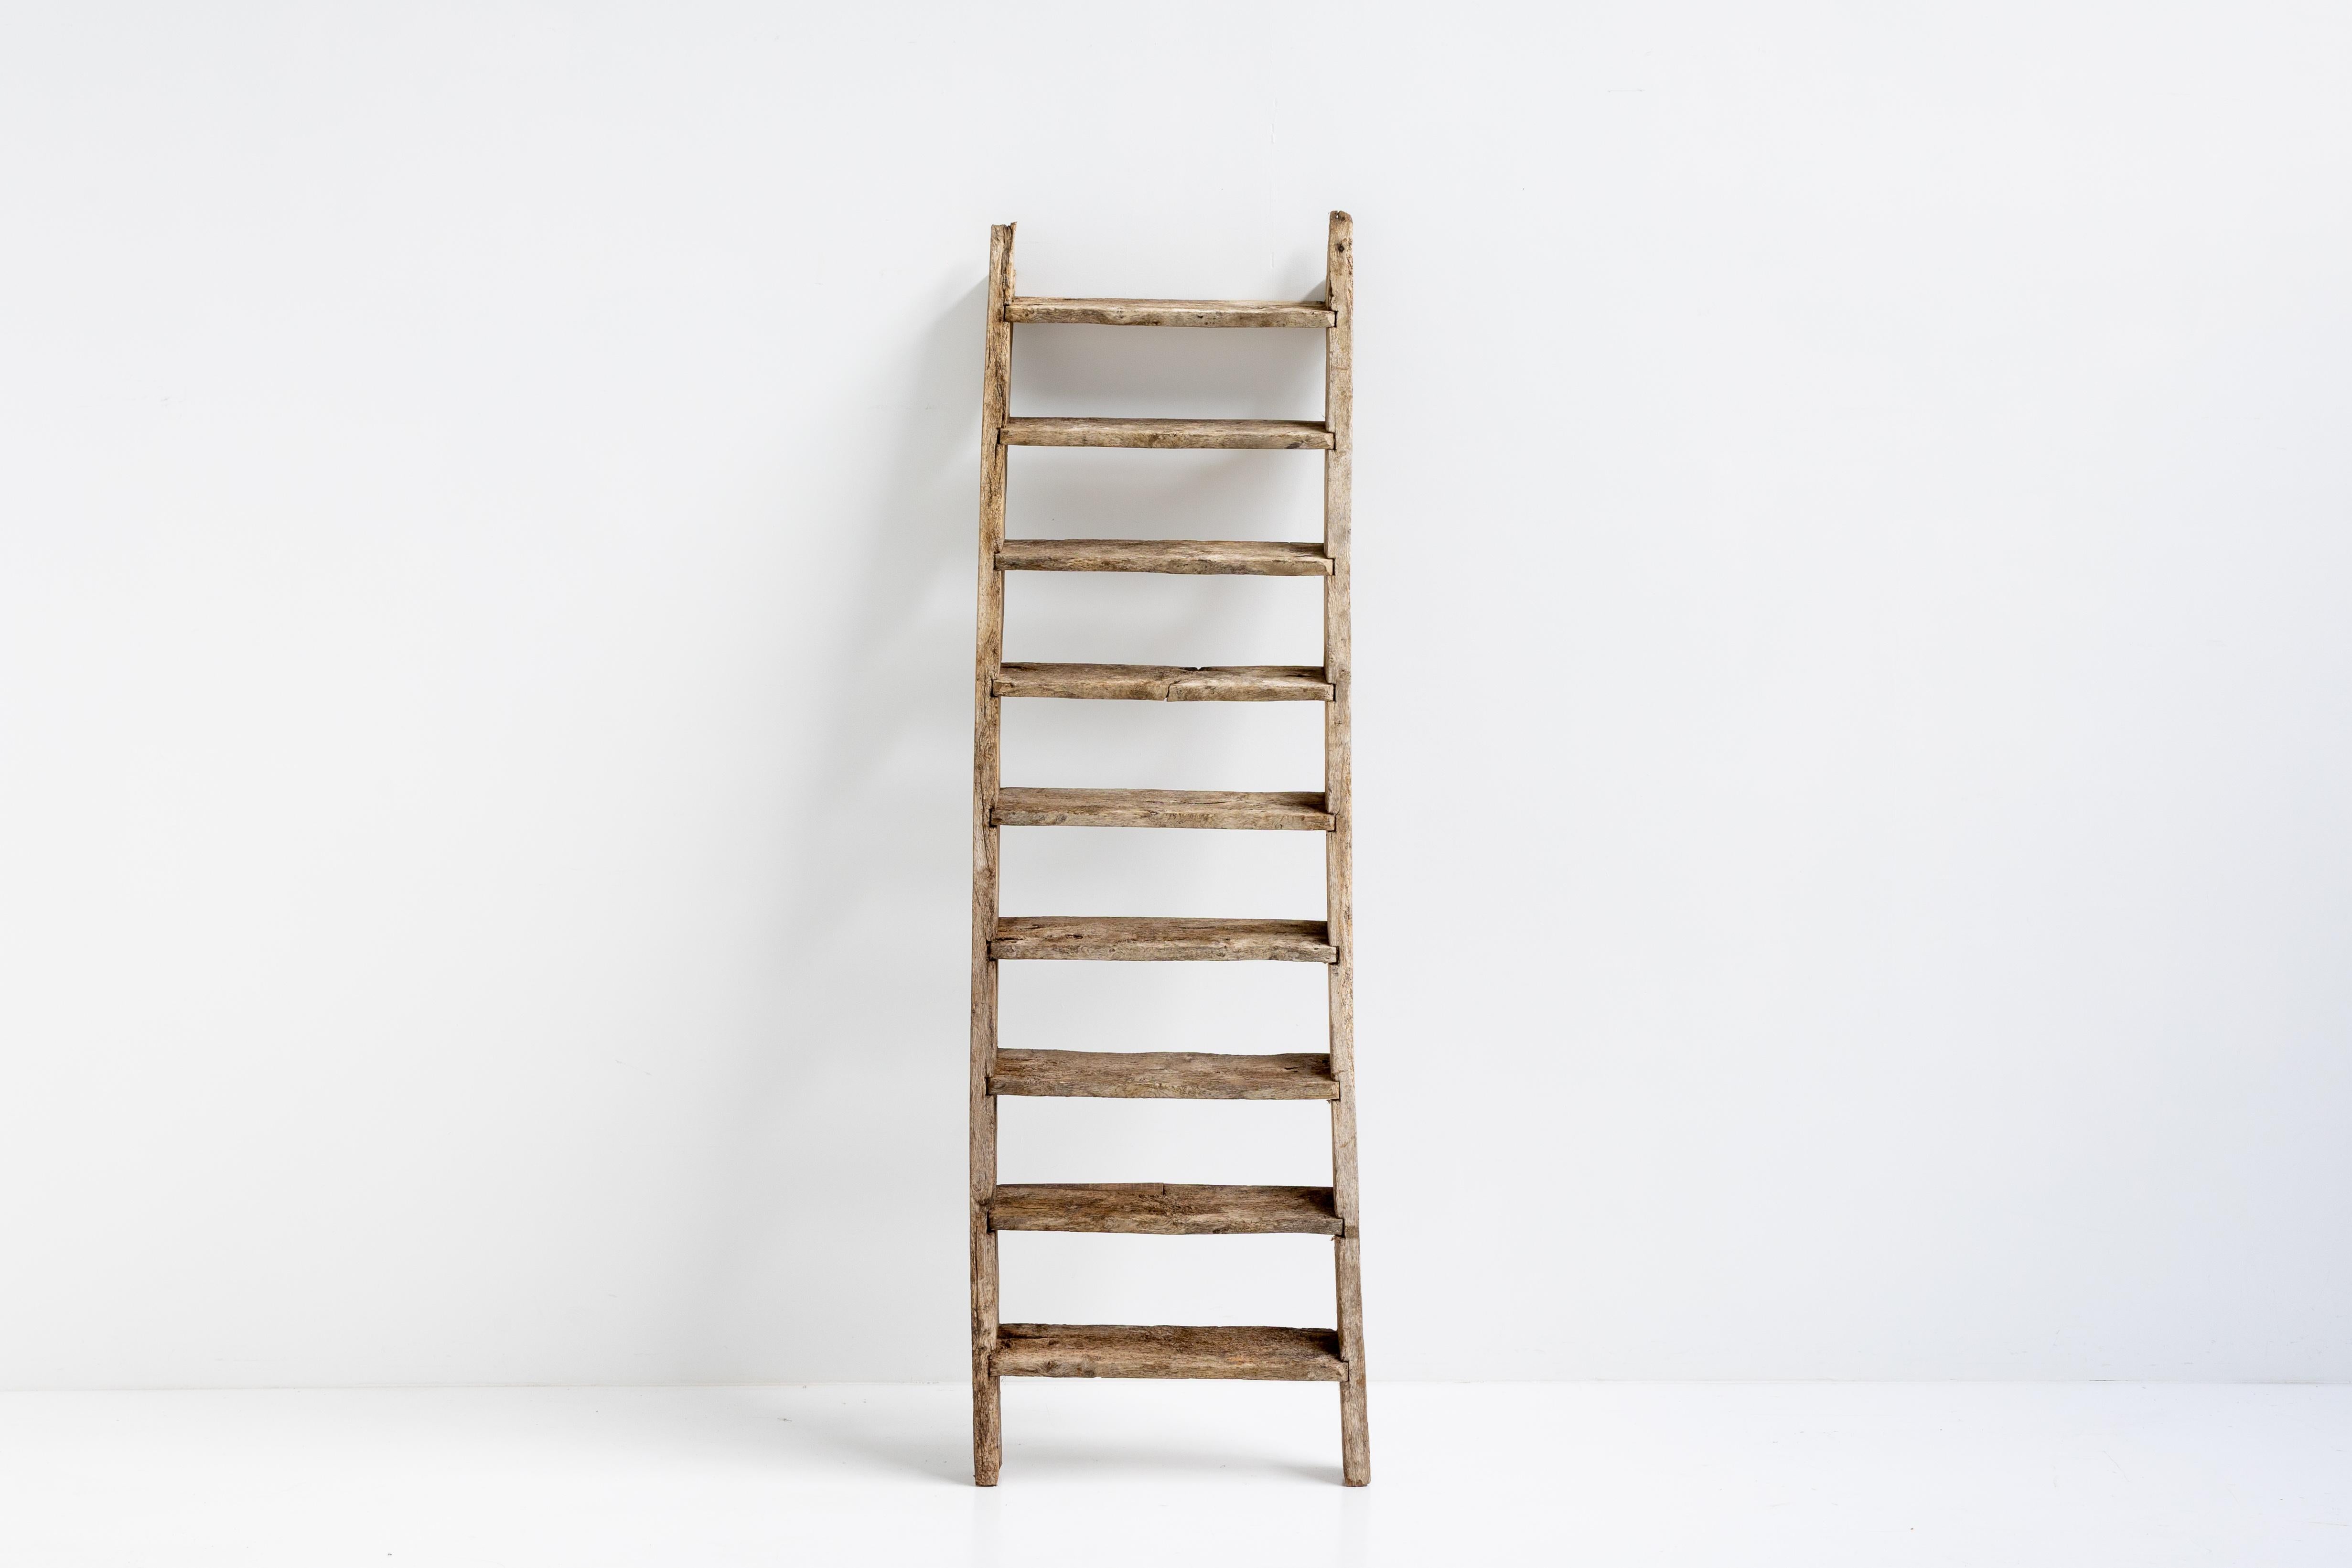 French Rustic Art Populaire Ladder, France, 20th Century For Sale